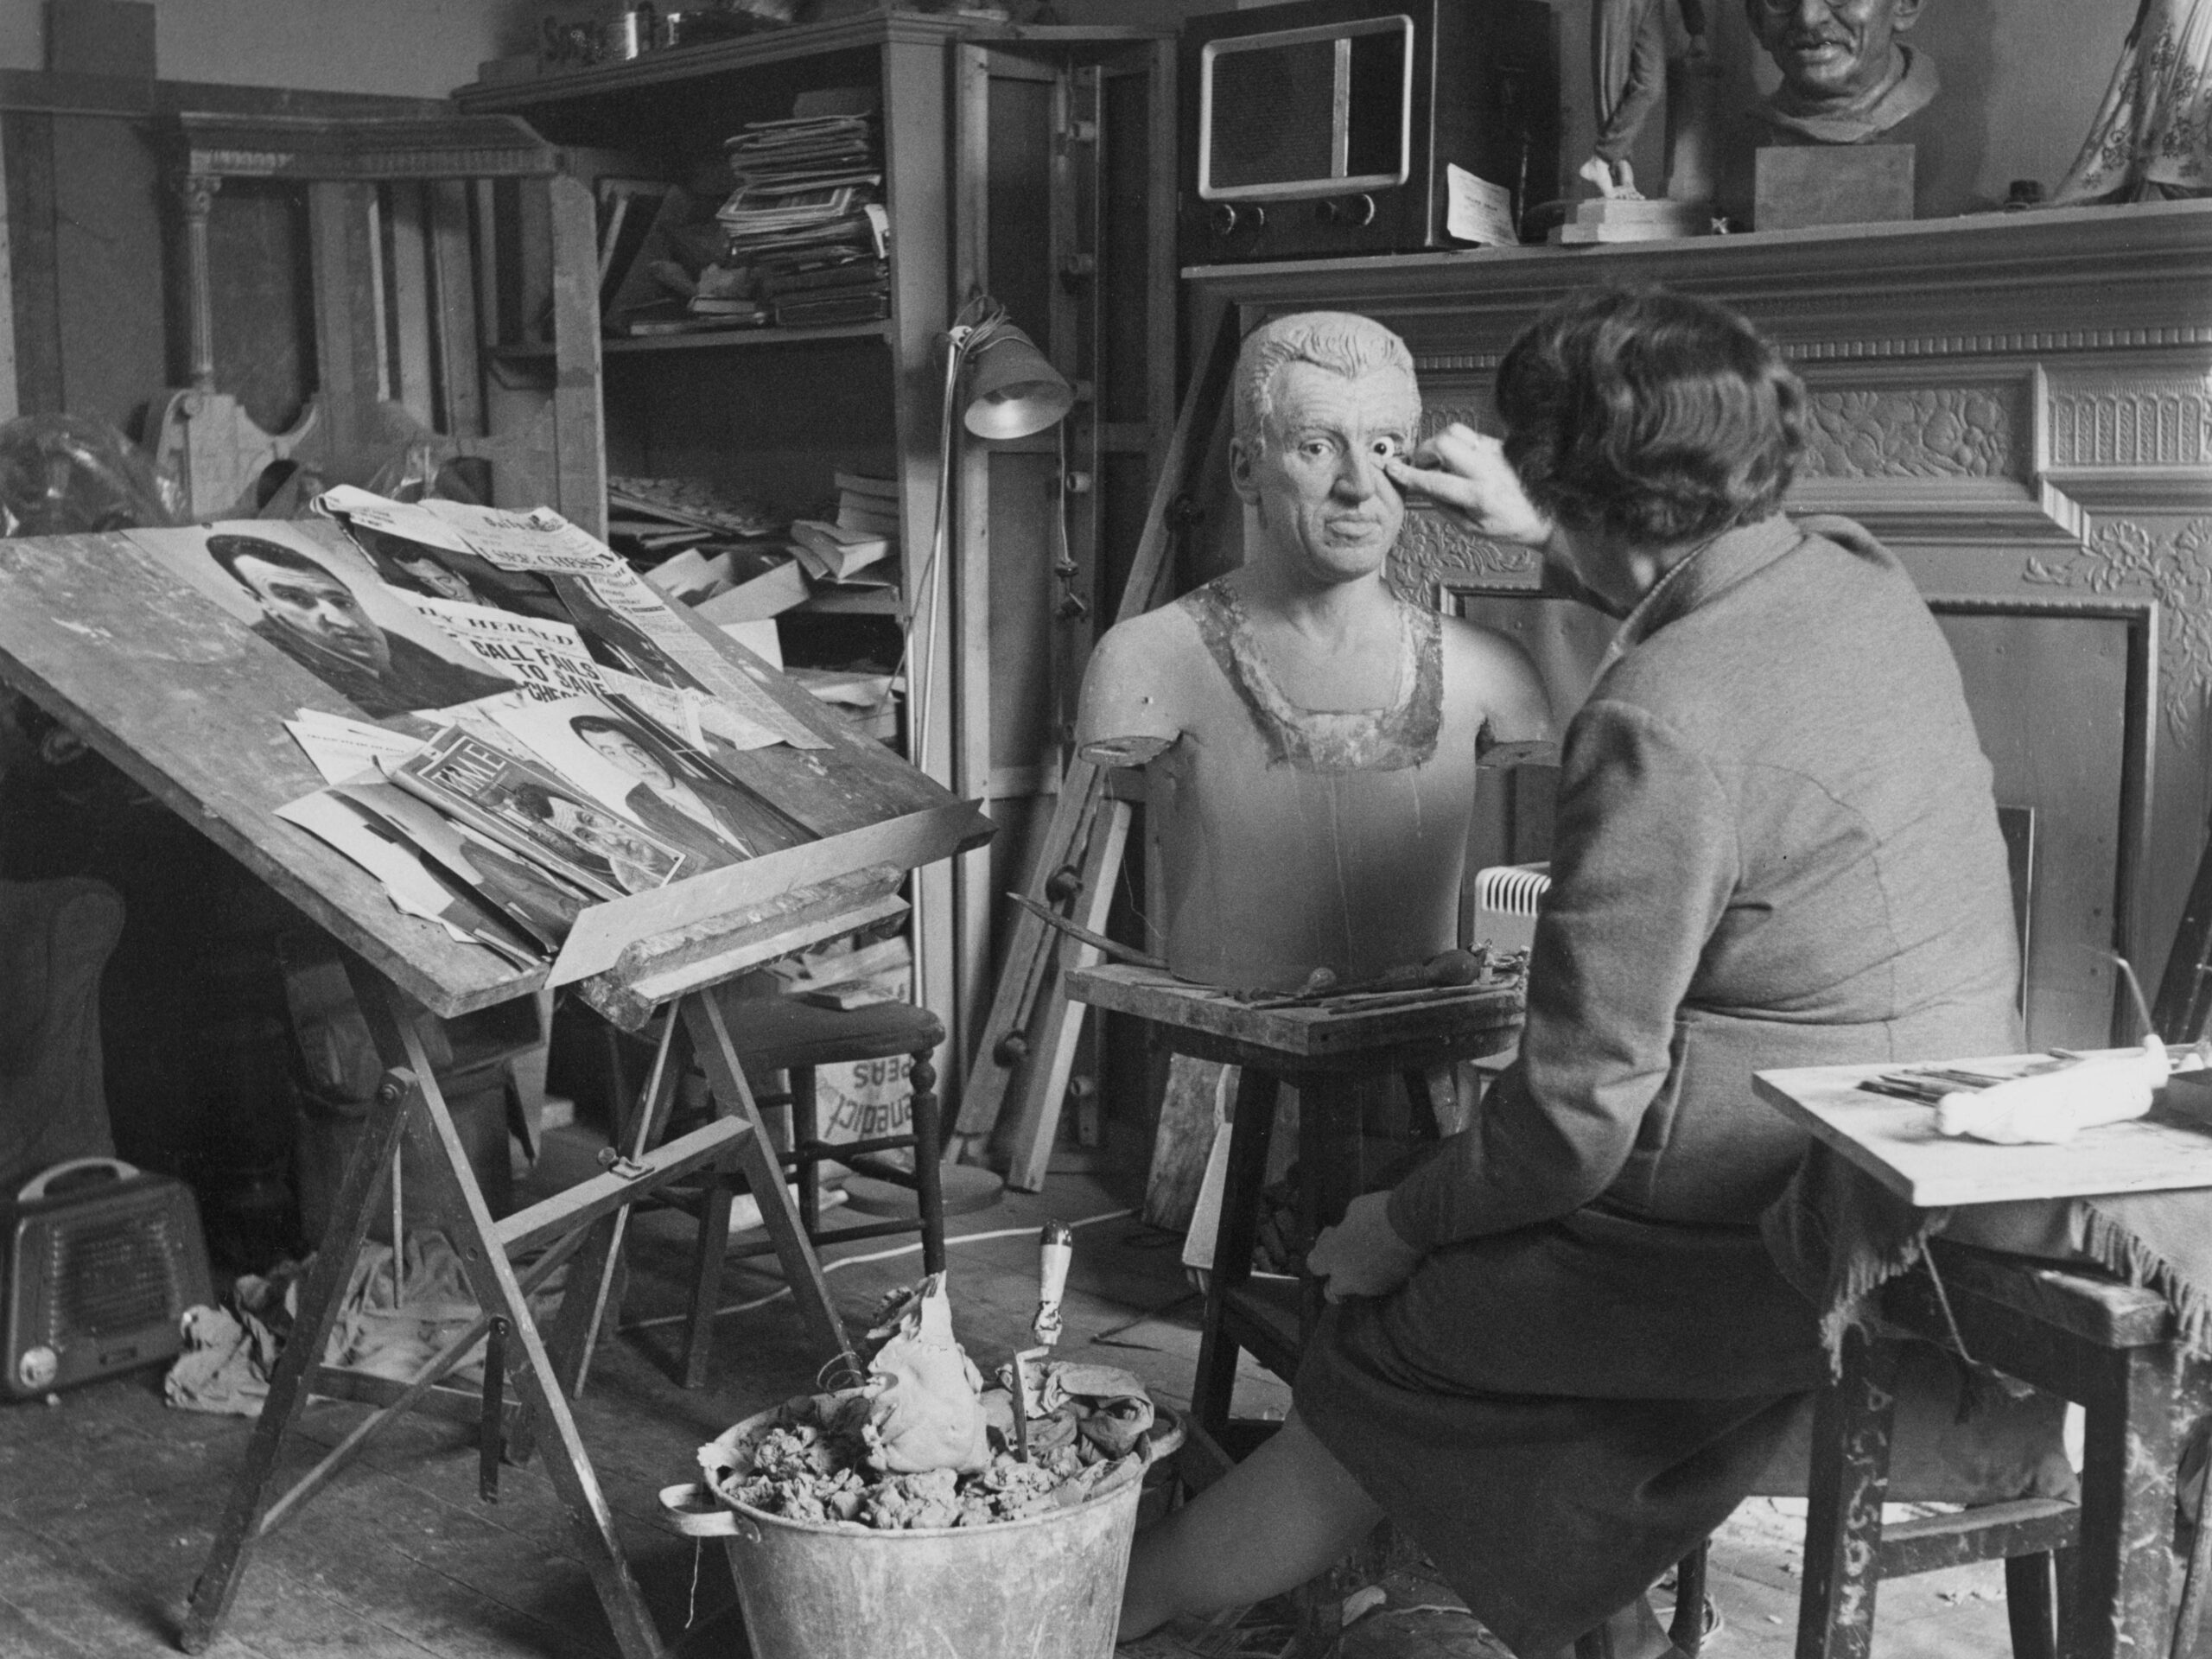 A waxwork of Caryl Chessman being sculpted for the Chamber of Horrors at Madame Tussauds in London, circa 1960.